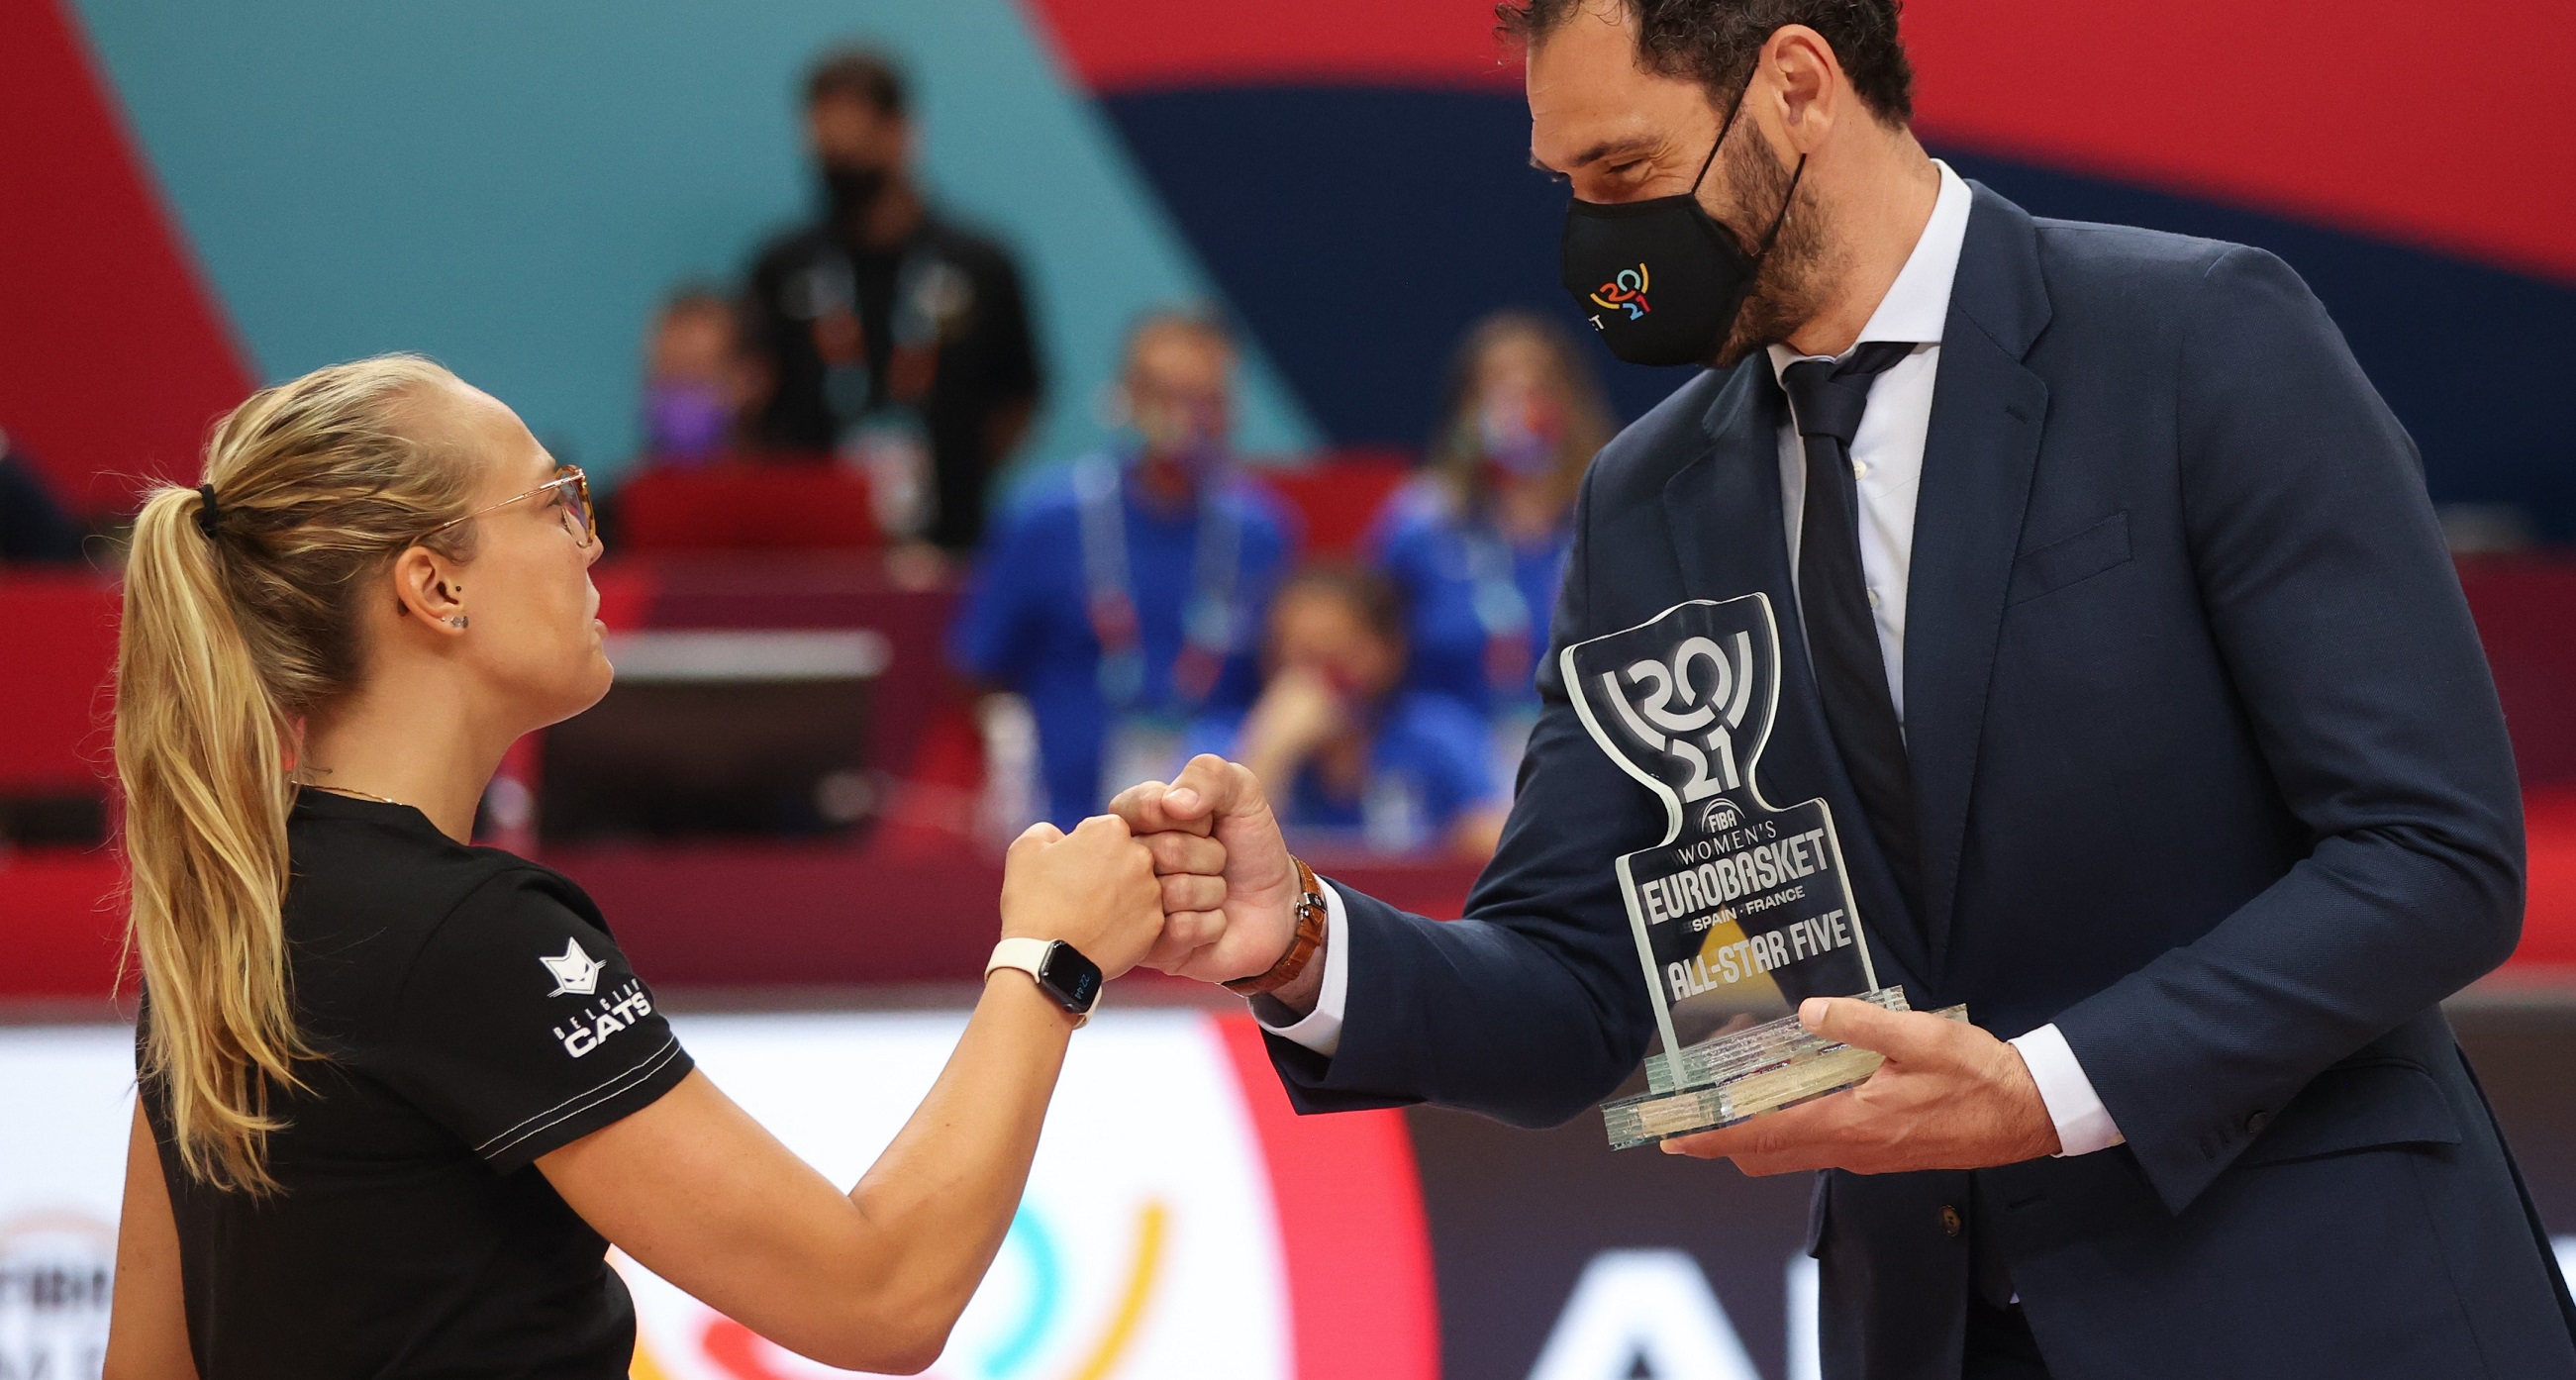 Belgian Cats’ guard Julie Allemand was named an All-Star Five following EuroBasket 2021, together with teammate Emma Meesseman 